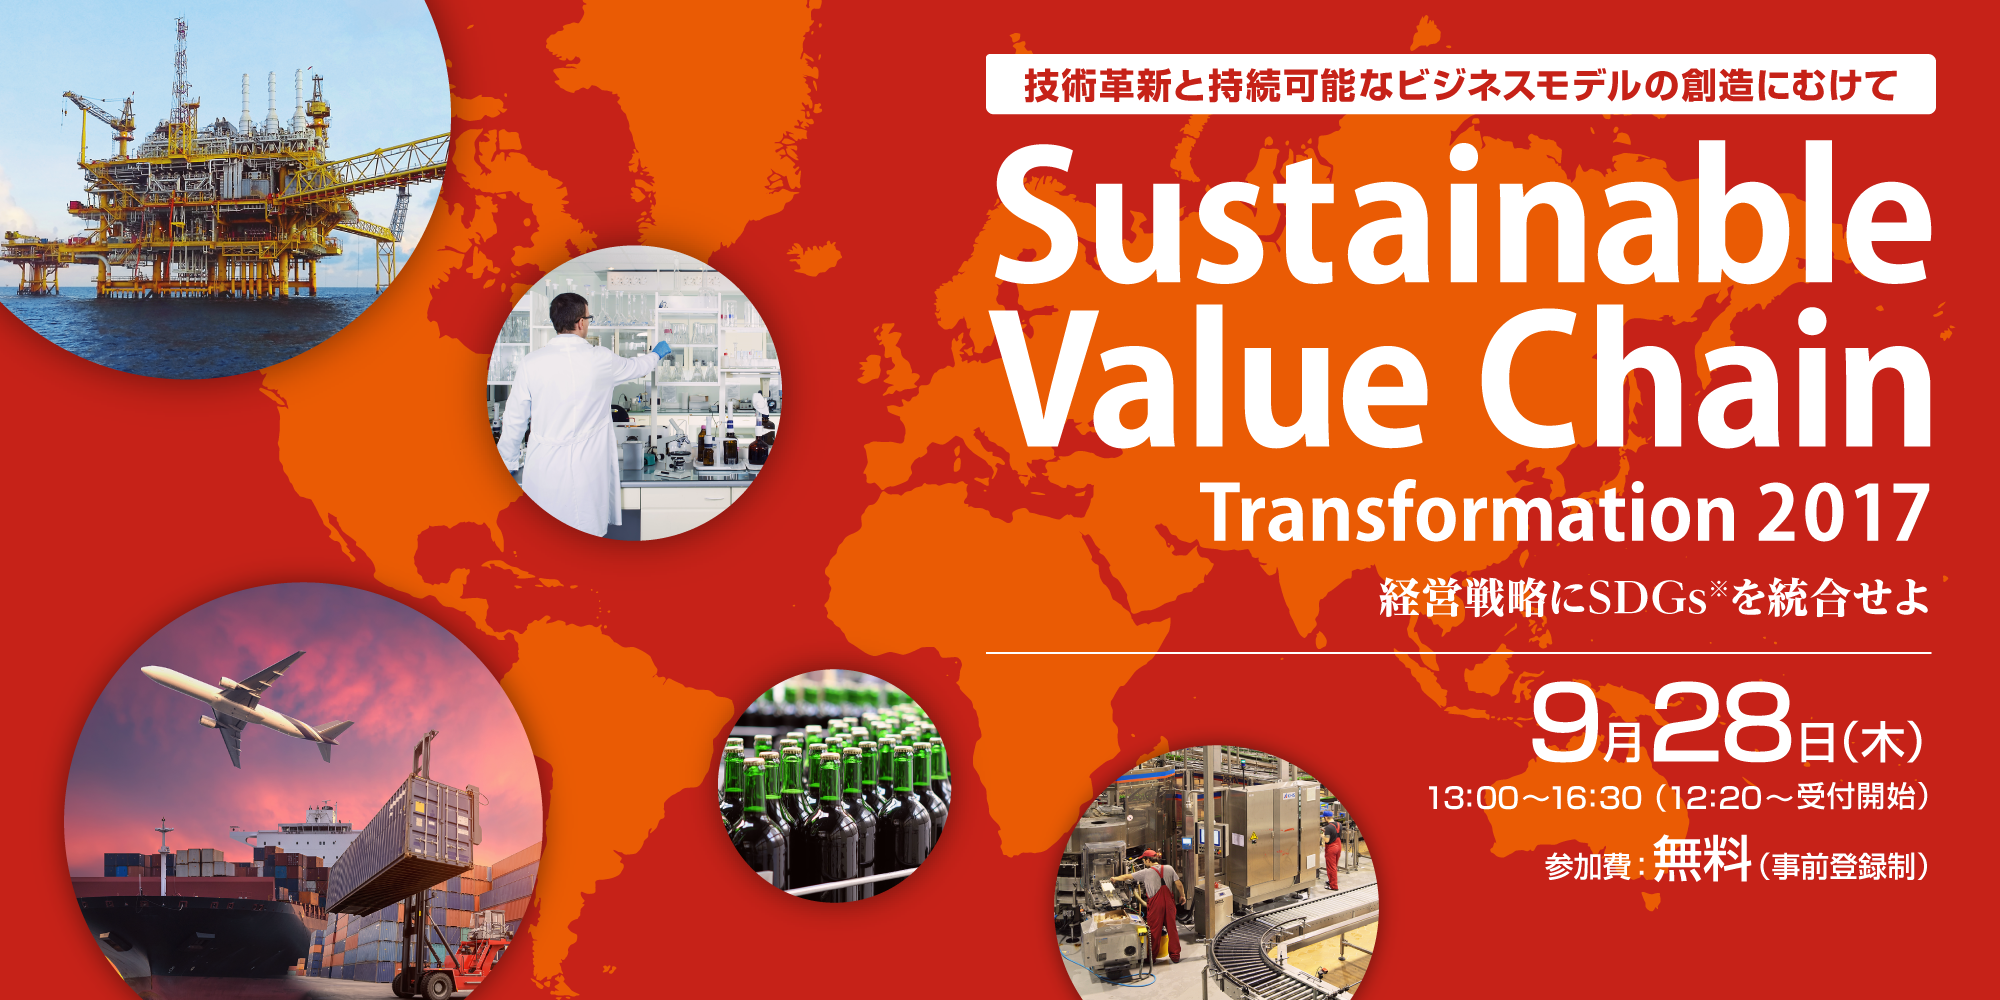 Sustainable Value Chain Transformation 2017